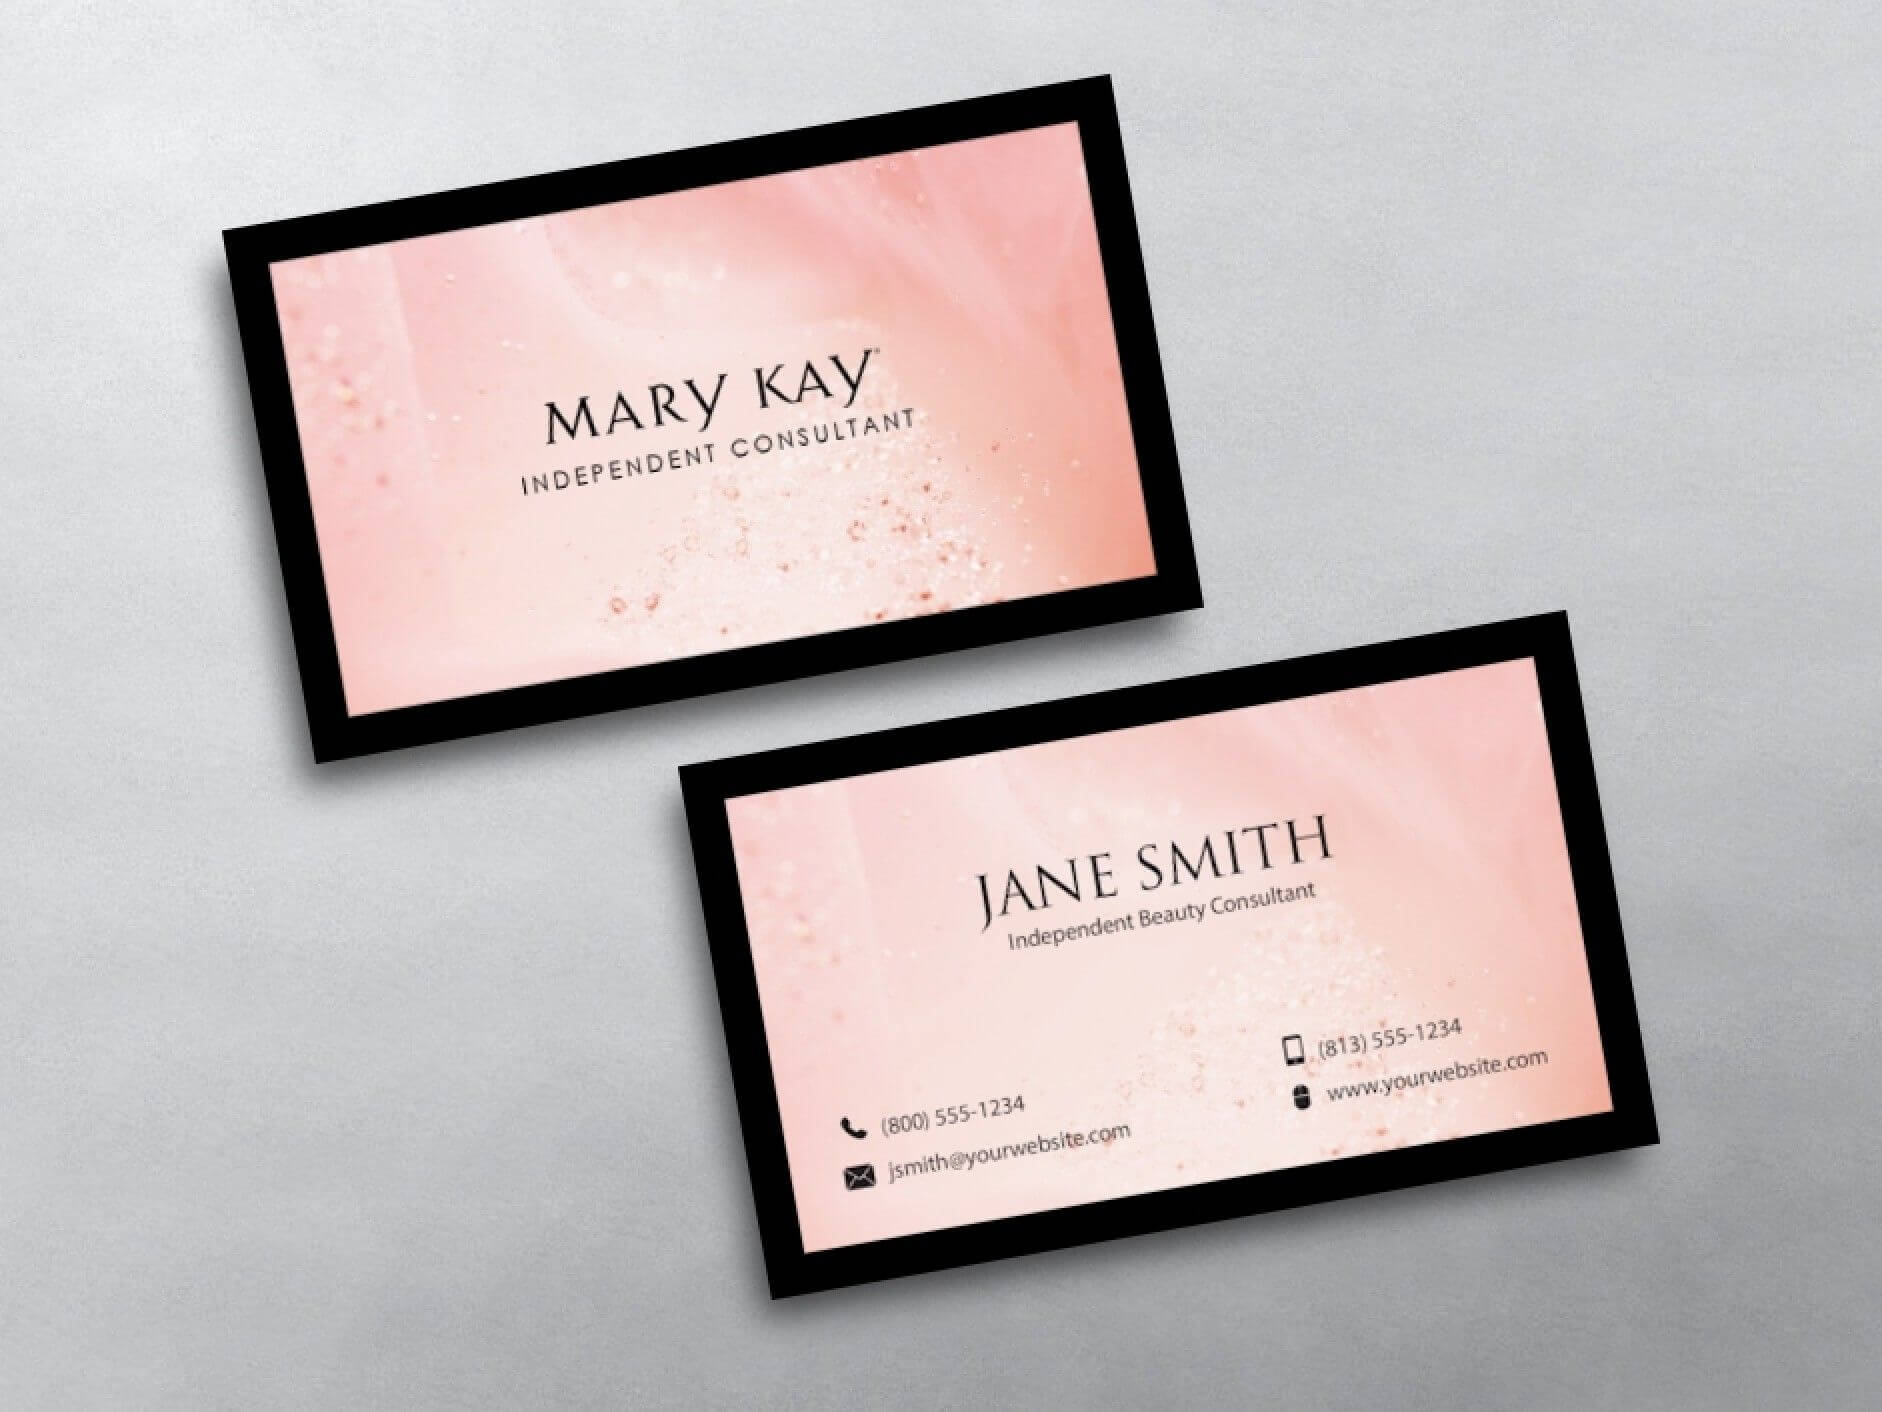 Mary Kay Business Cards | Beauty Business Cards, Free Pertaining To Mary Kay Business Cards Templates Free